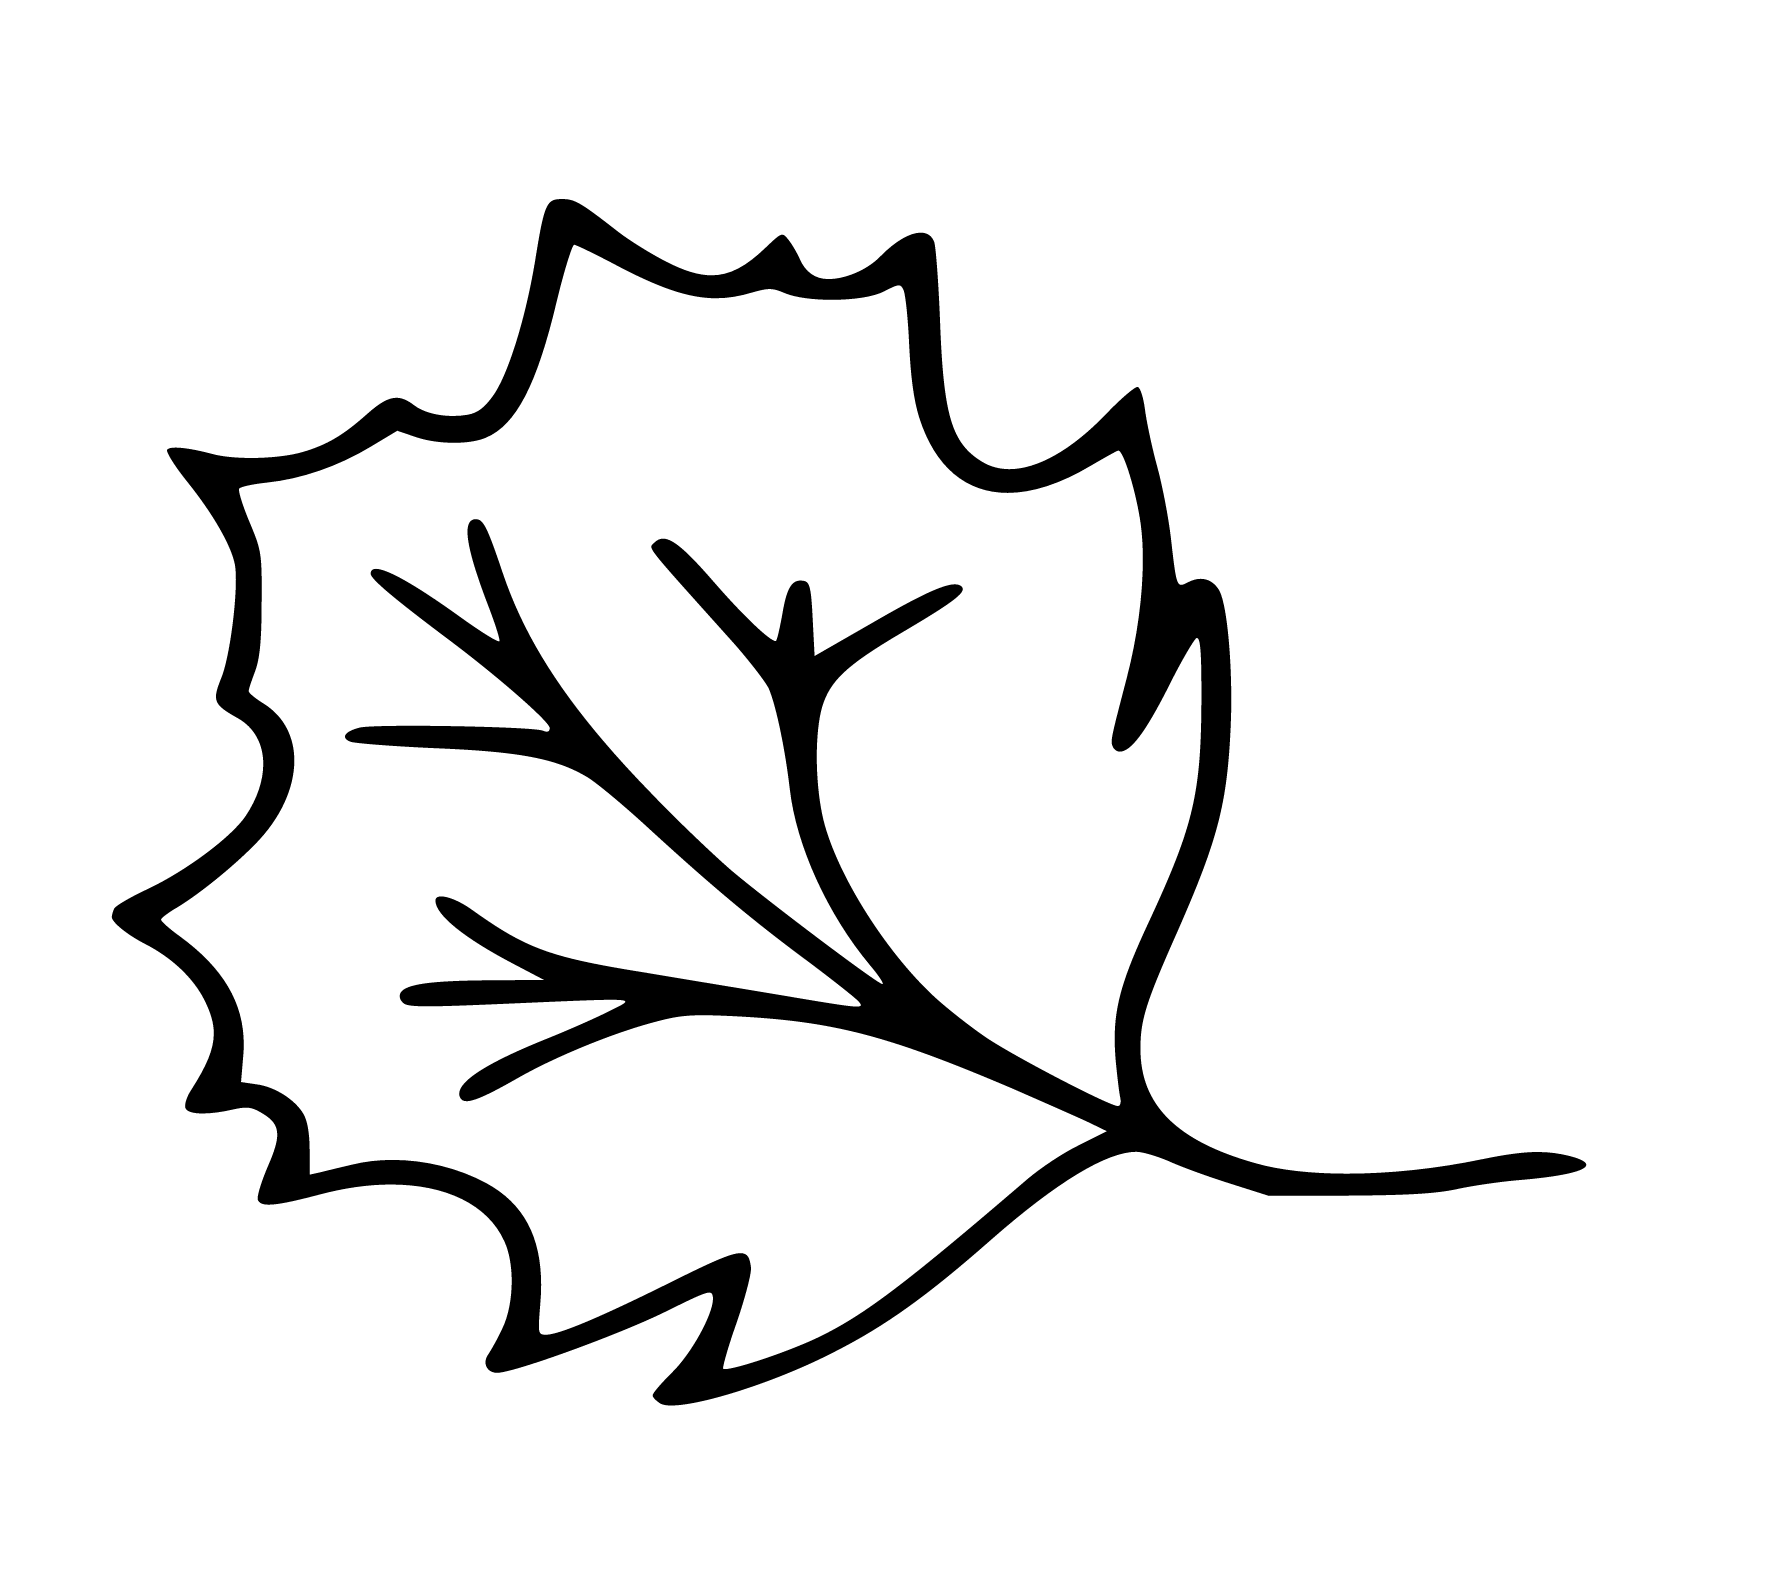 Printable Leaf of Maple Tree Coloring Page for kids.